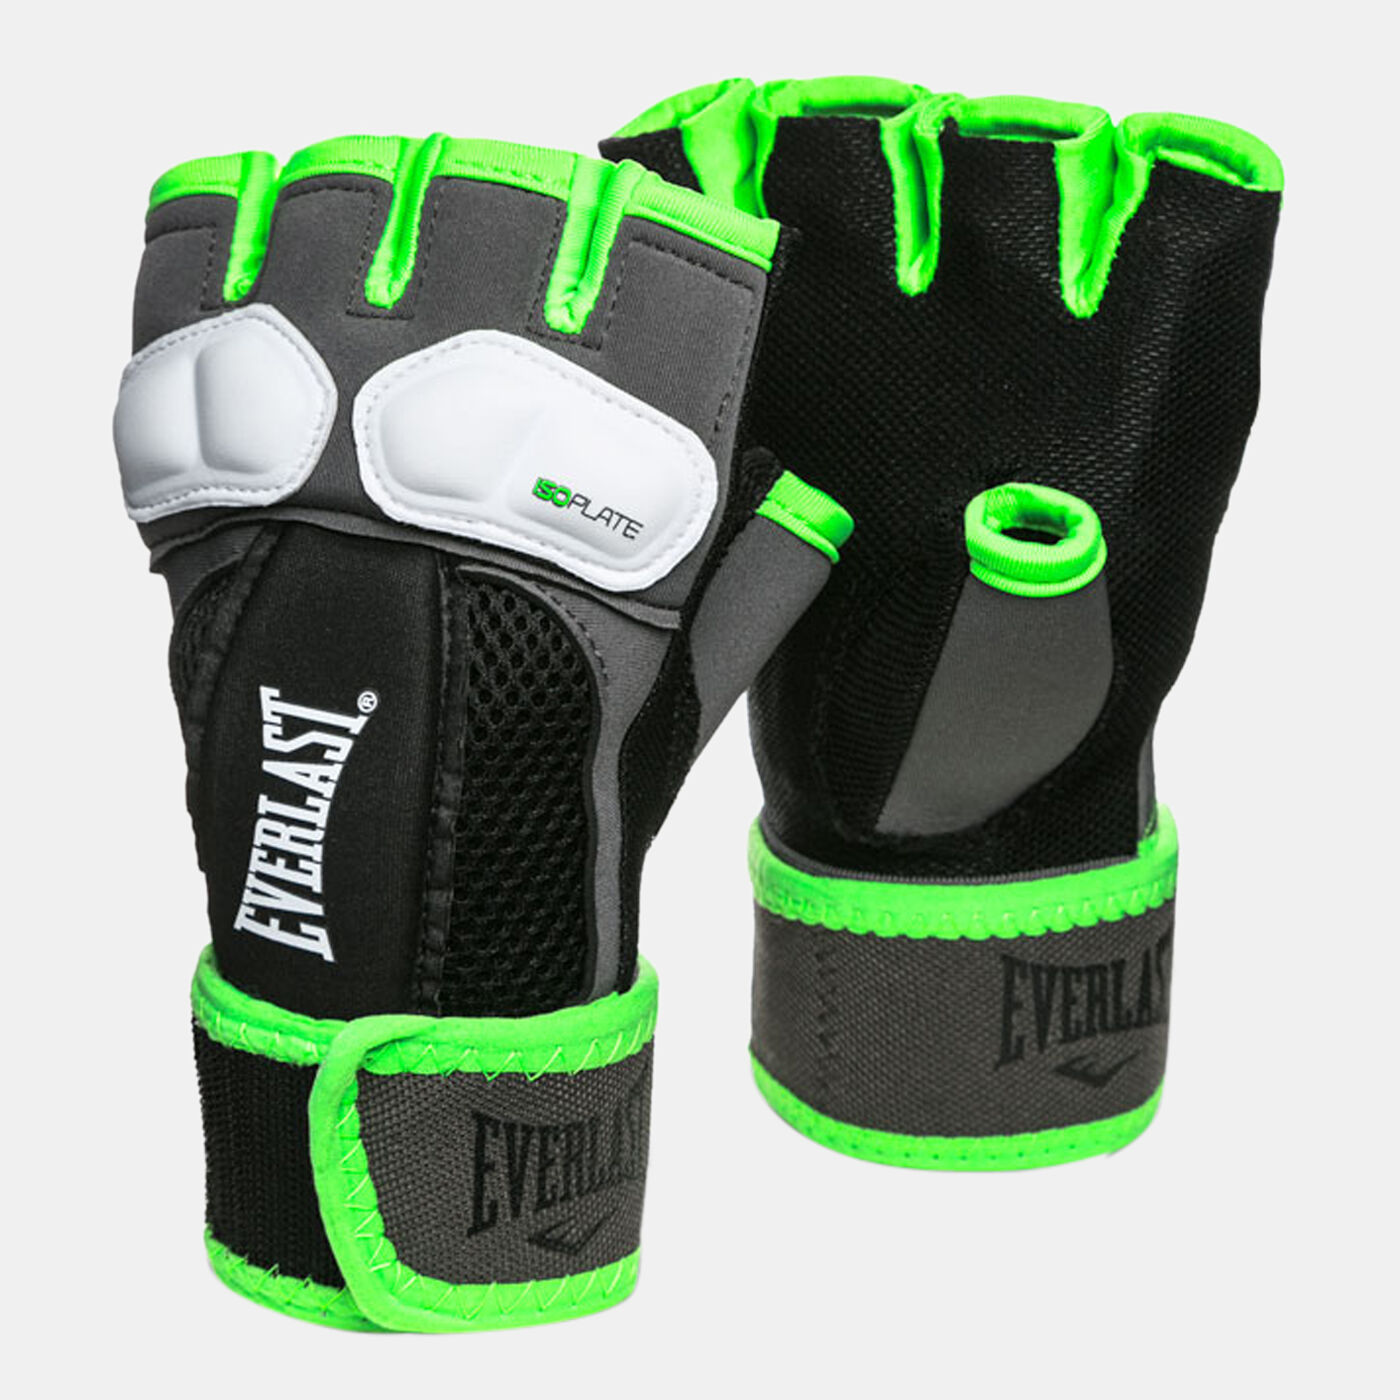 Prime Evergel Boxing Hand Wraps - XL